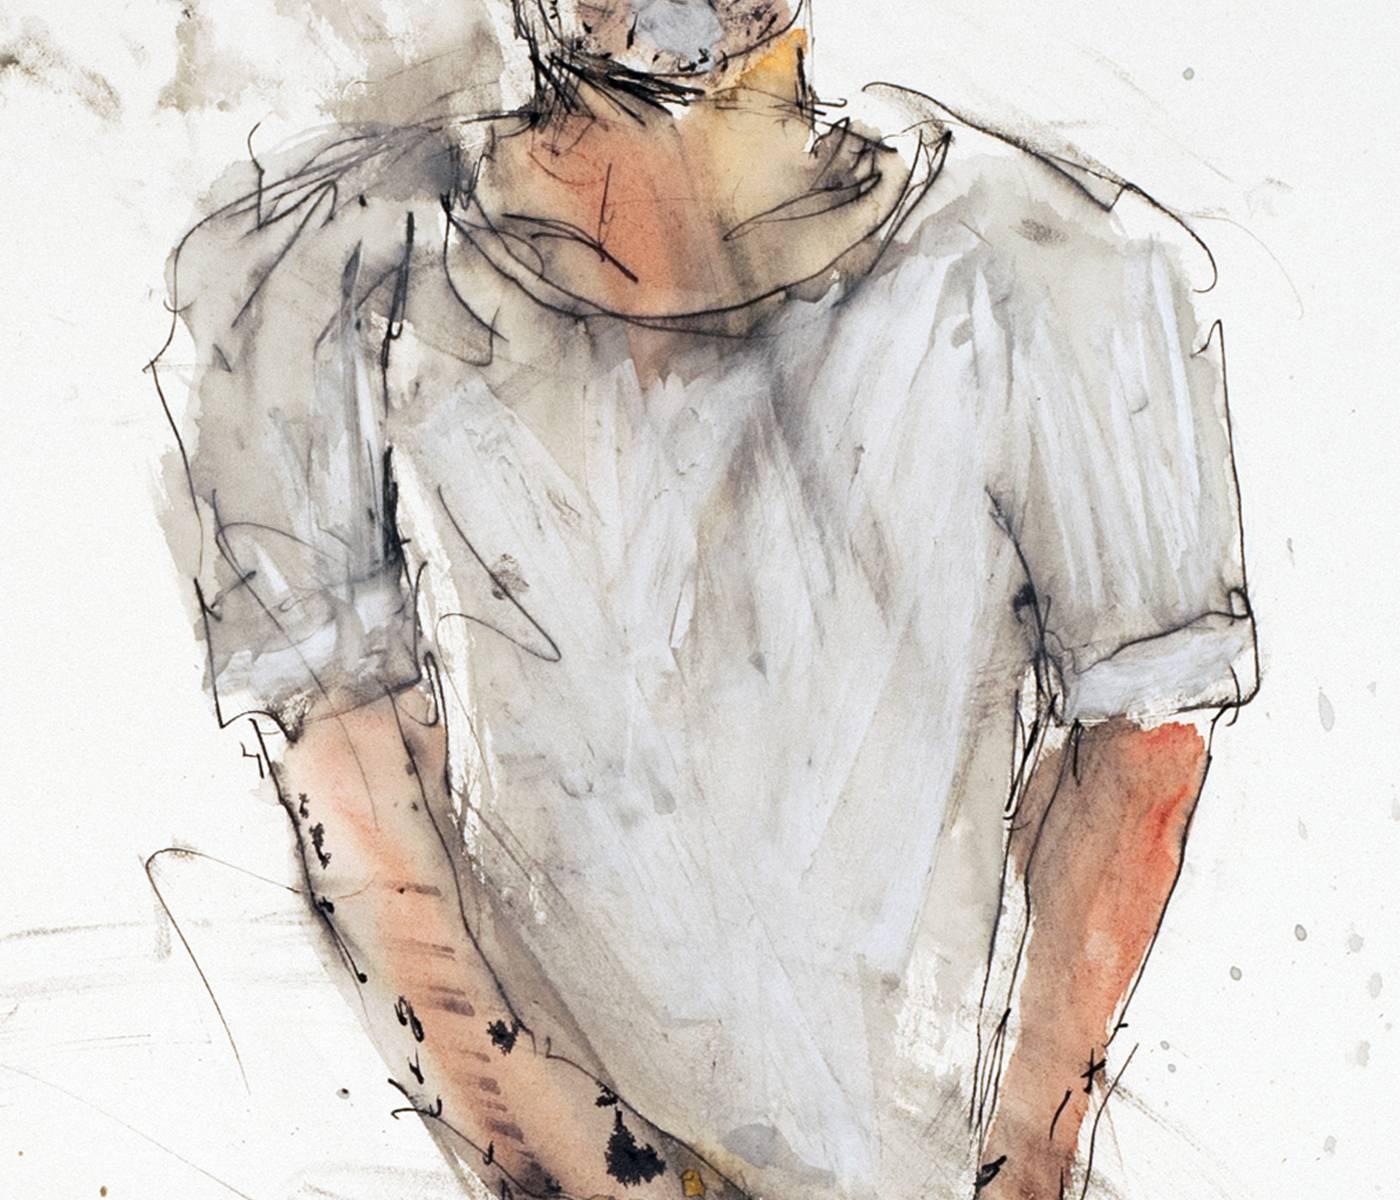 Self Portrait of the artist, standing man, watercolor painting on white paper. - Contemporary Art by Michael Hafftka